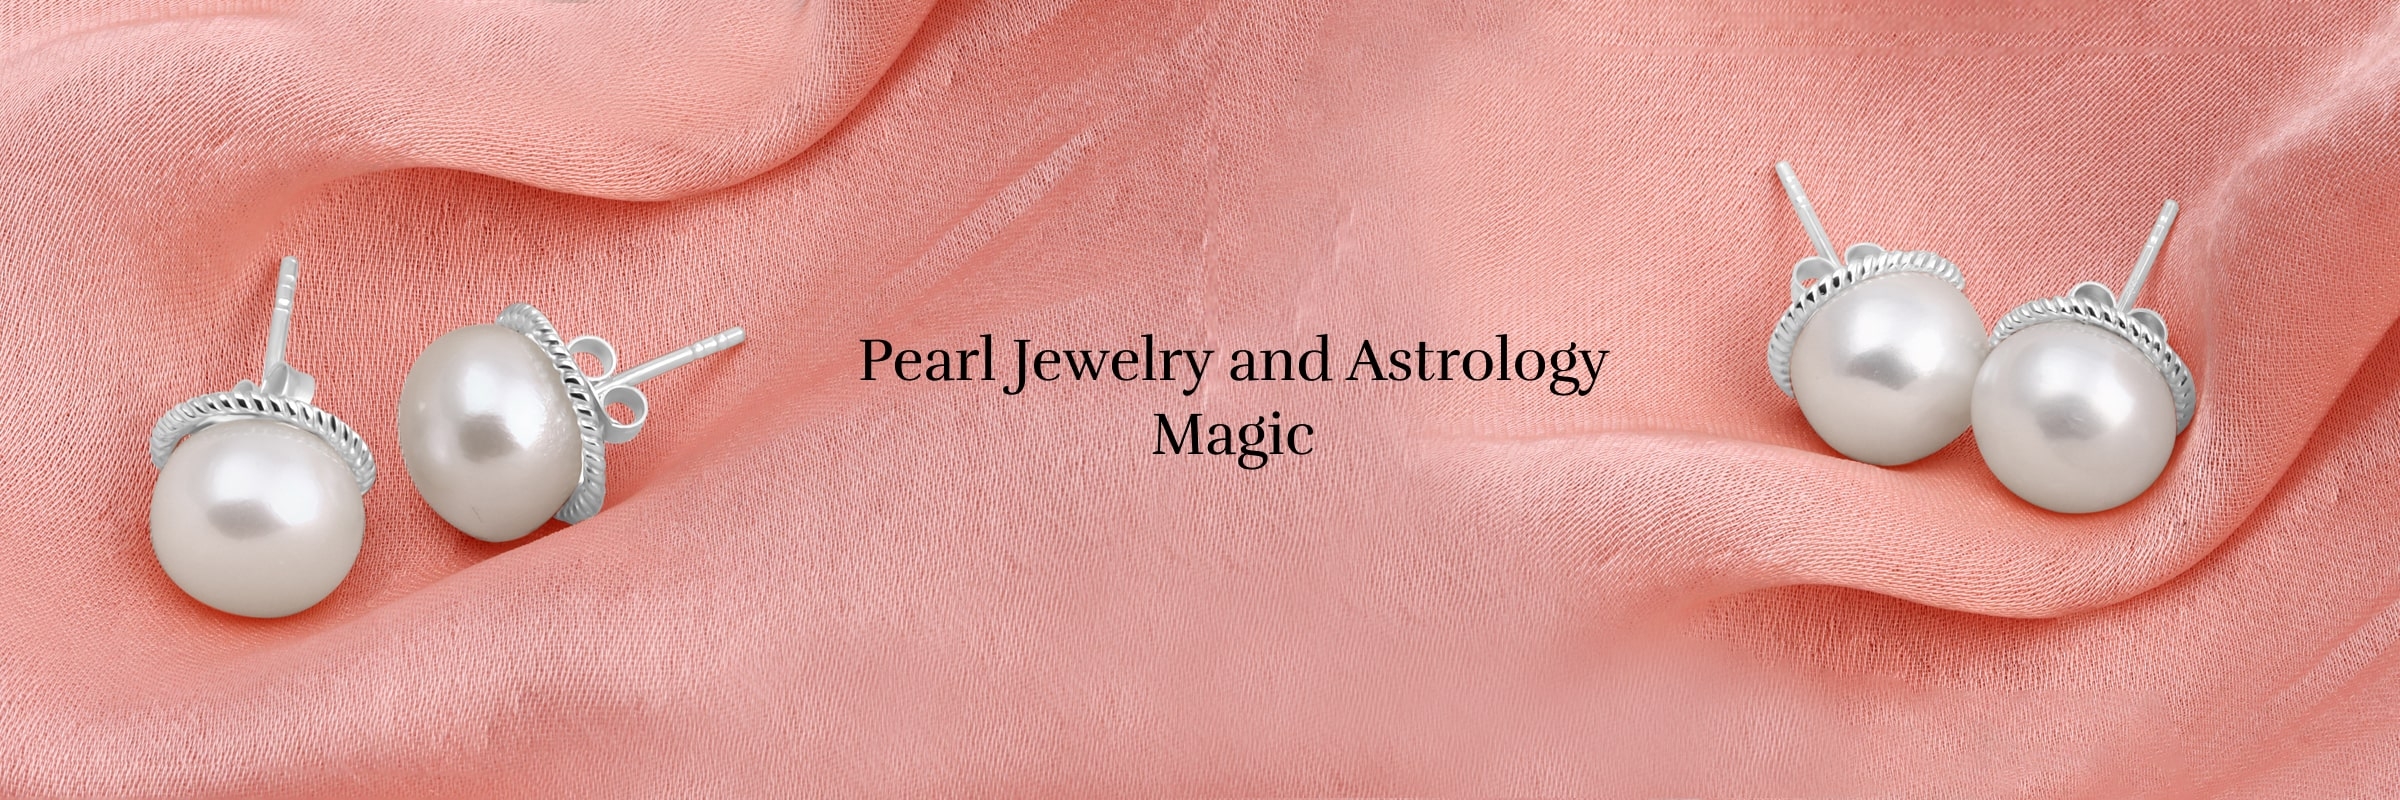 Astrological Benefits Of Wearing Pearl jewelry